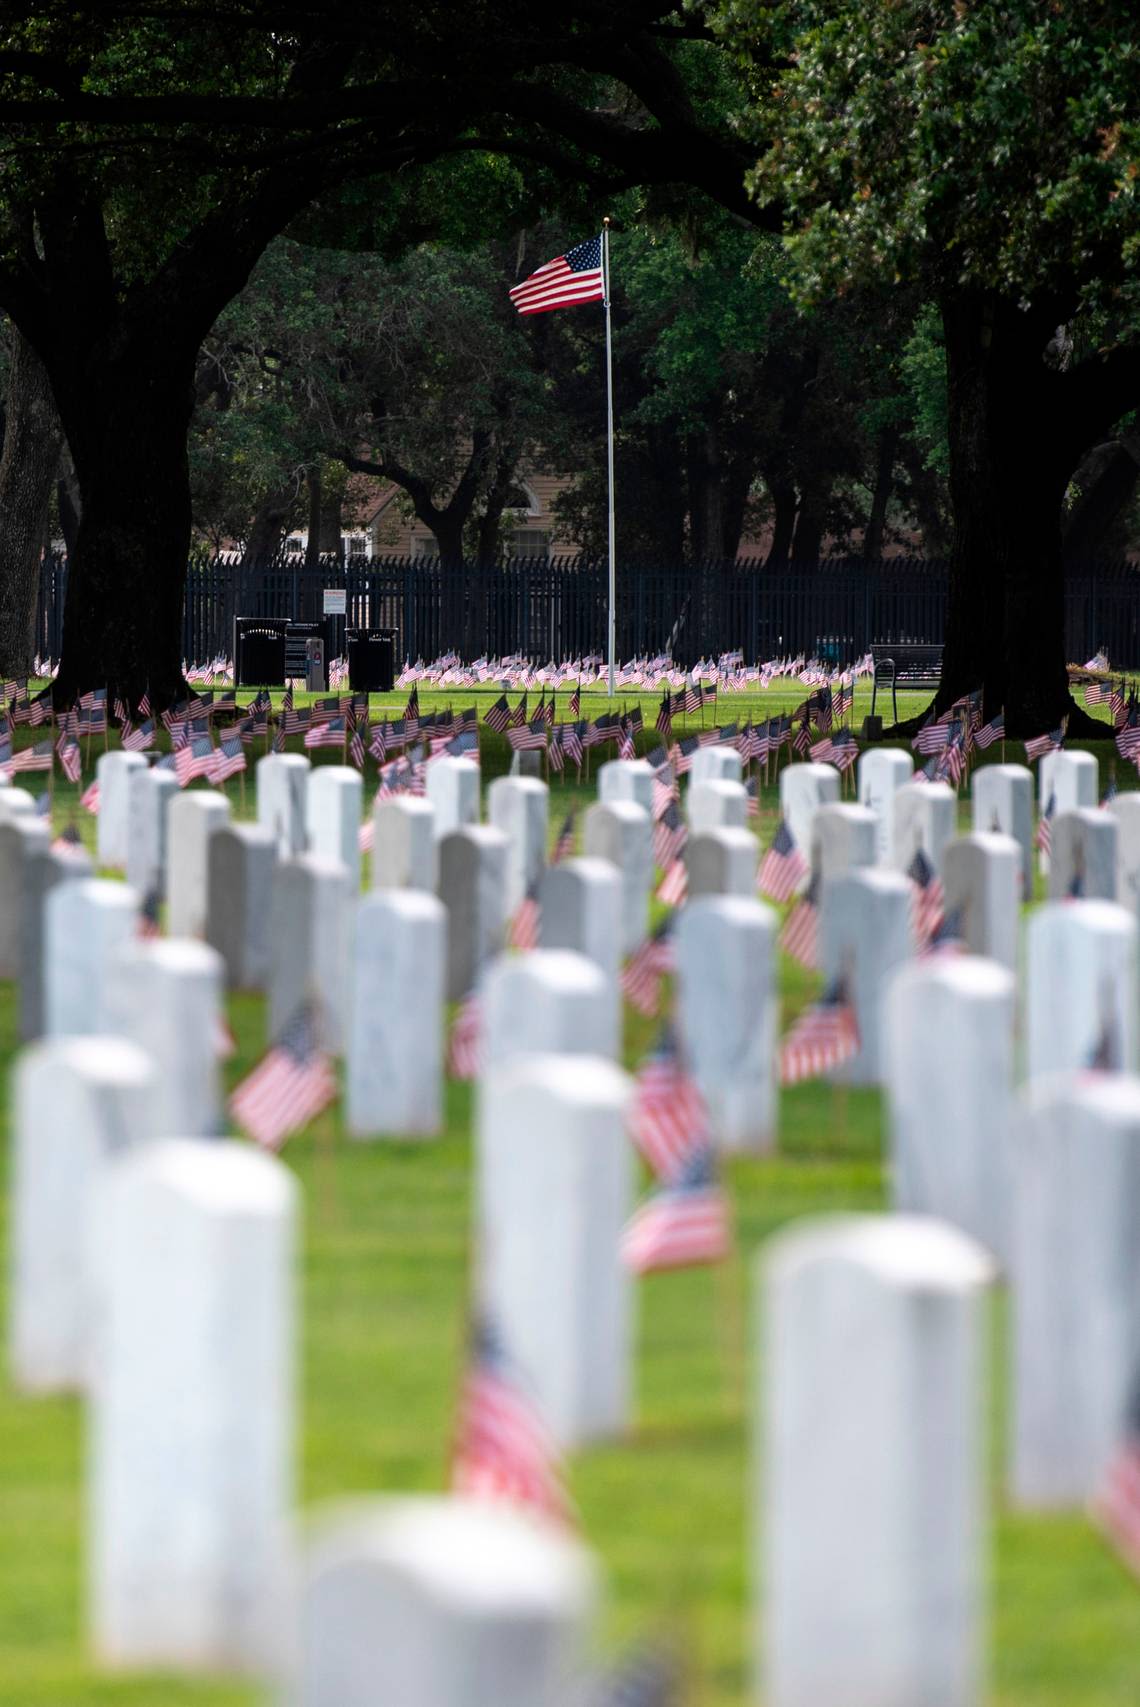 Setting the record straight on the differences between Memorial Day and Veterans Day